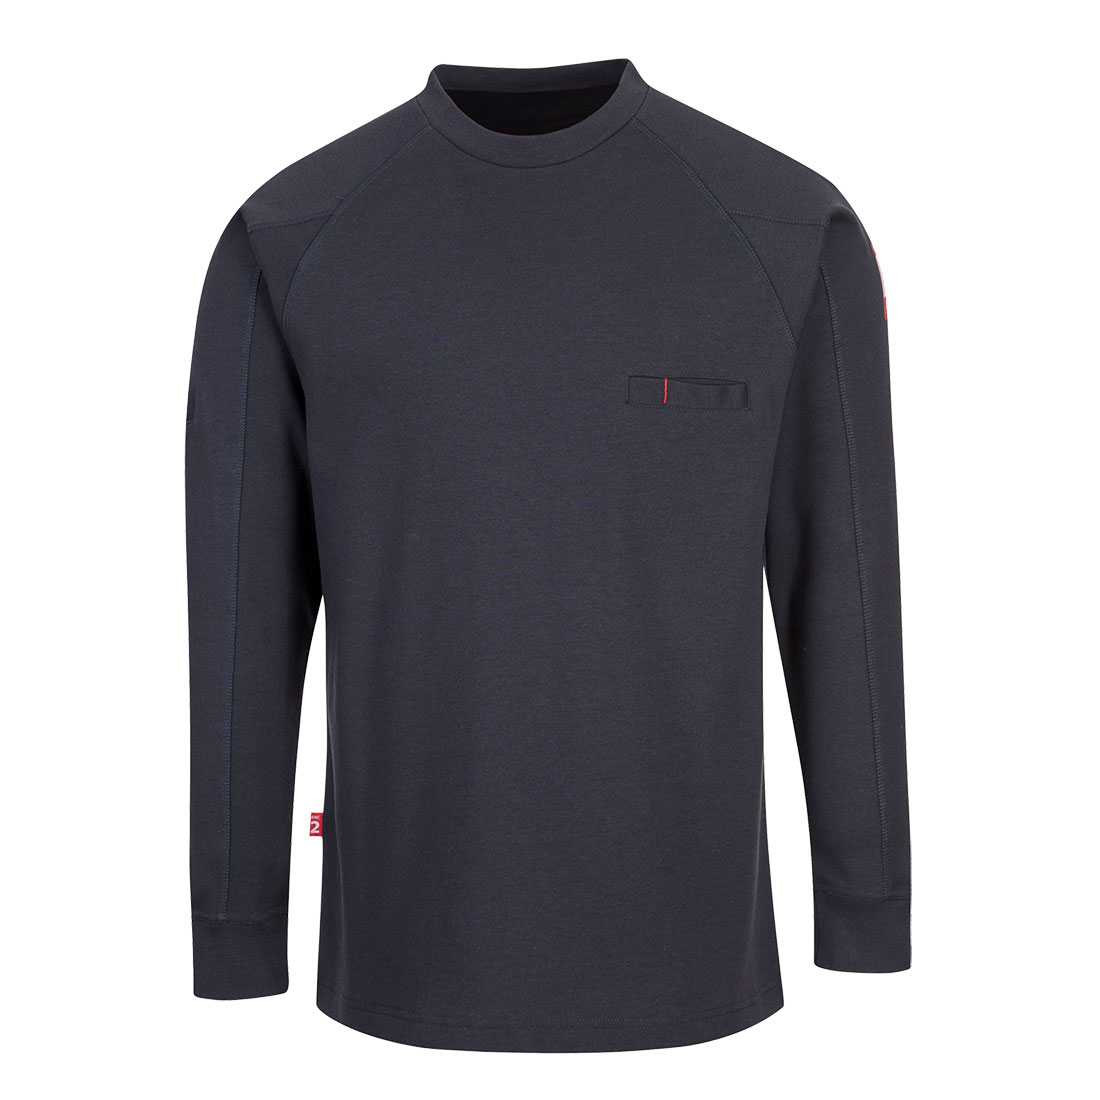 FR33 Portwest® Bizflame® Knit Flame-Resistant Anti-Static Crew Neck Shirts - navy